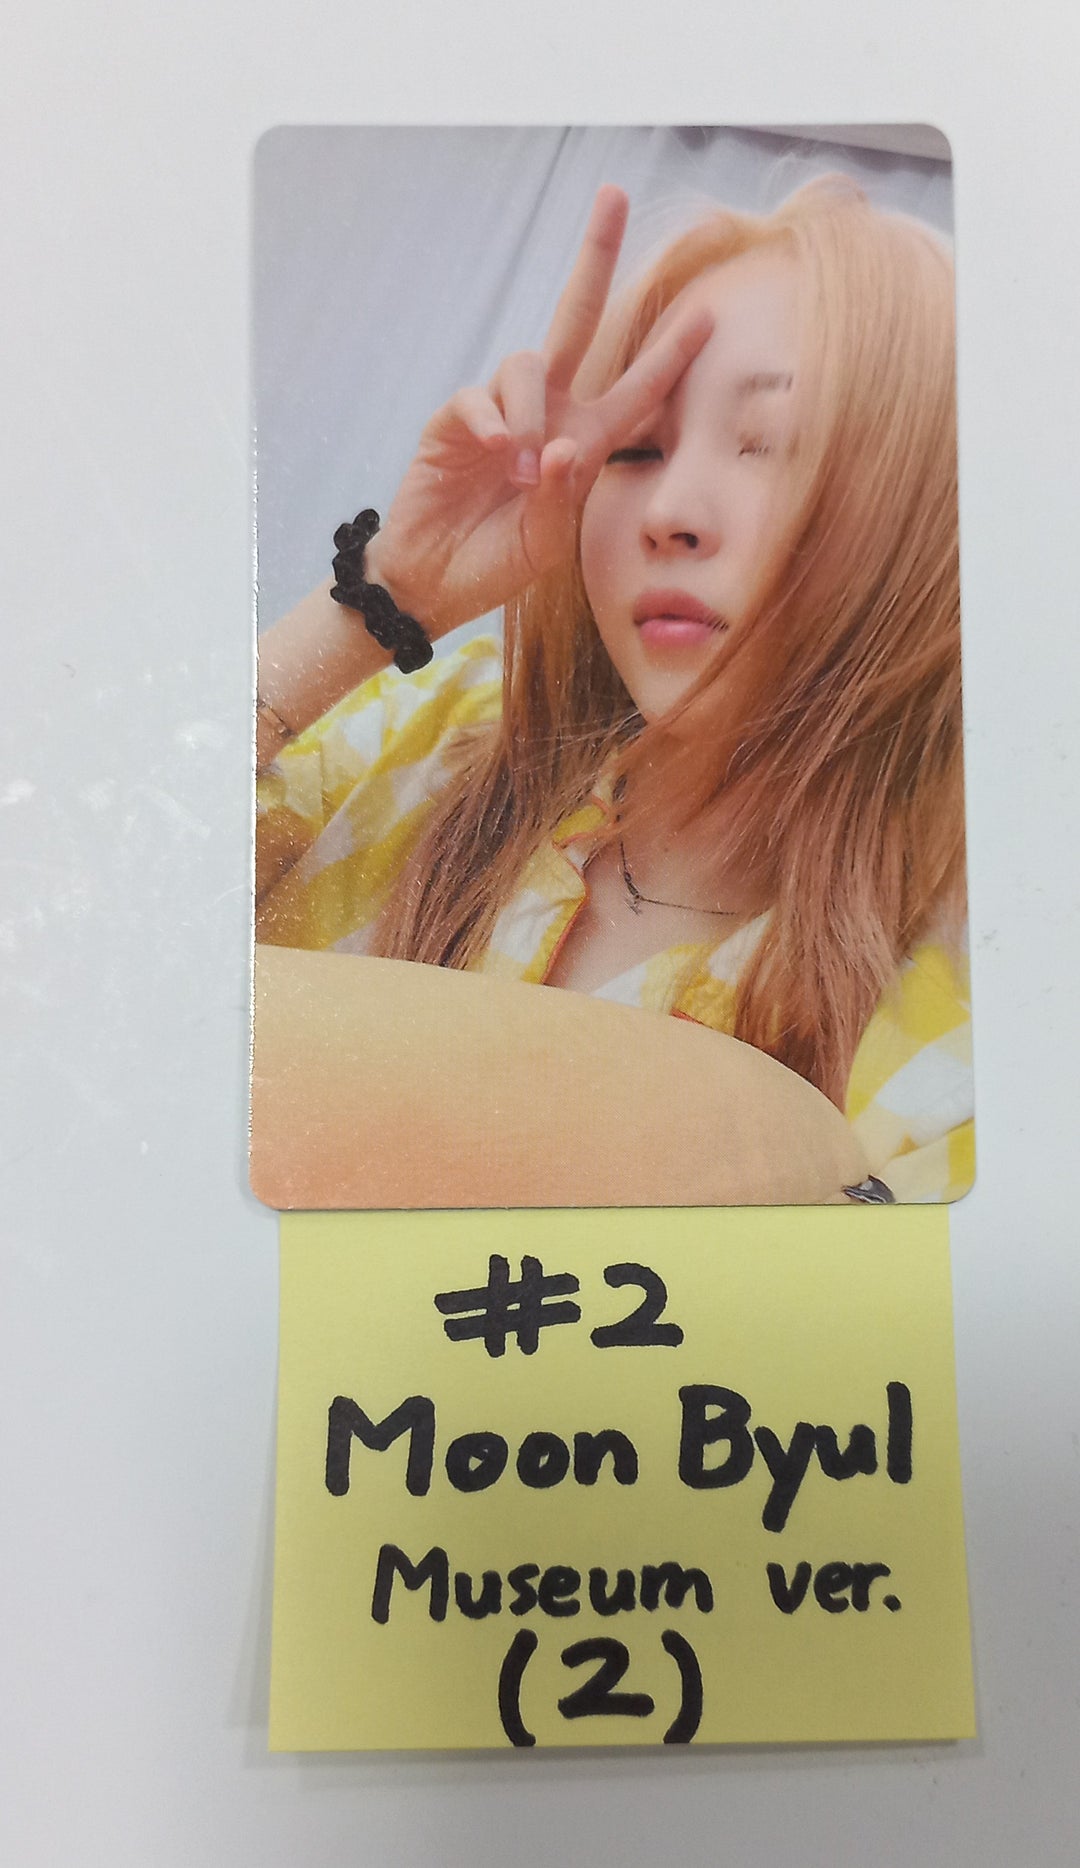 MOONBYUL "Starlit of Muse" - Official Photocard [Museum Ver.] [24.2.22]